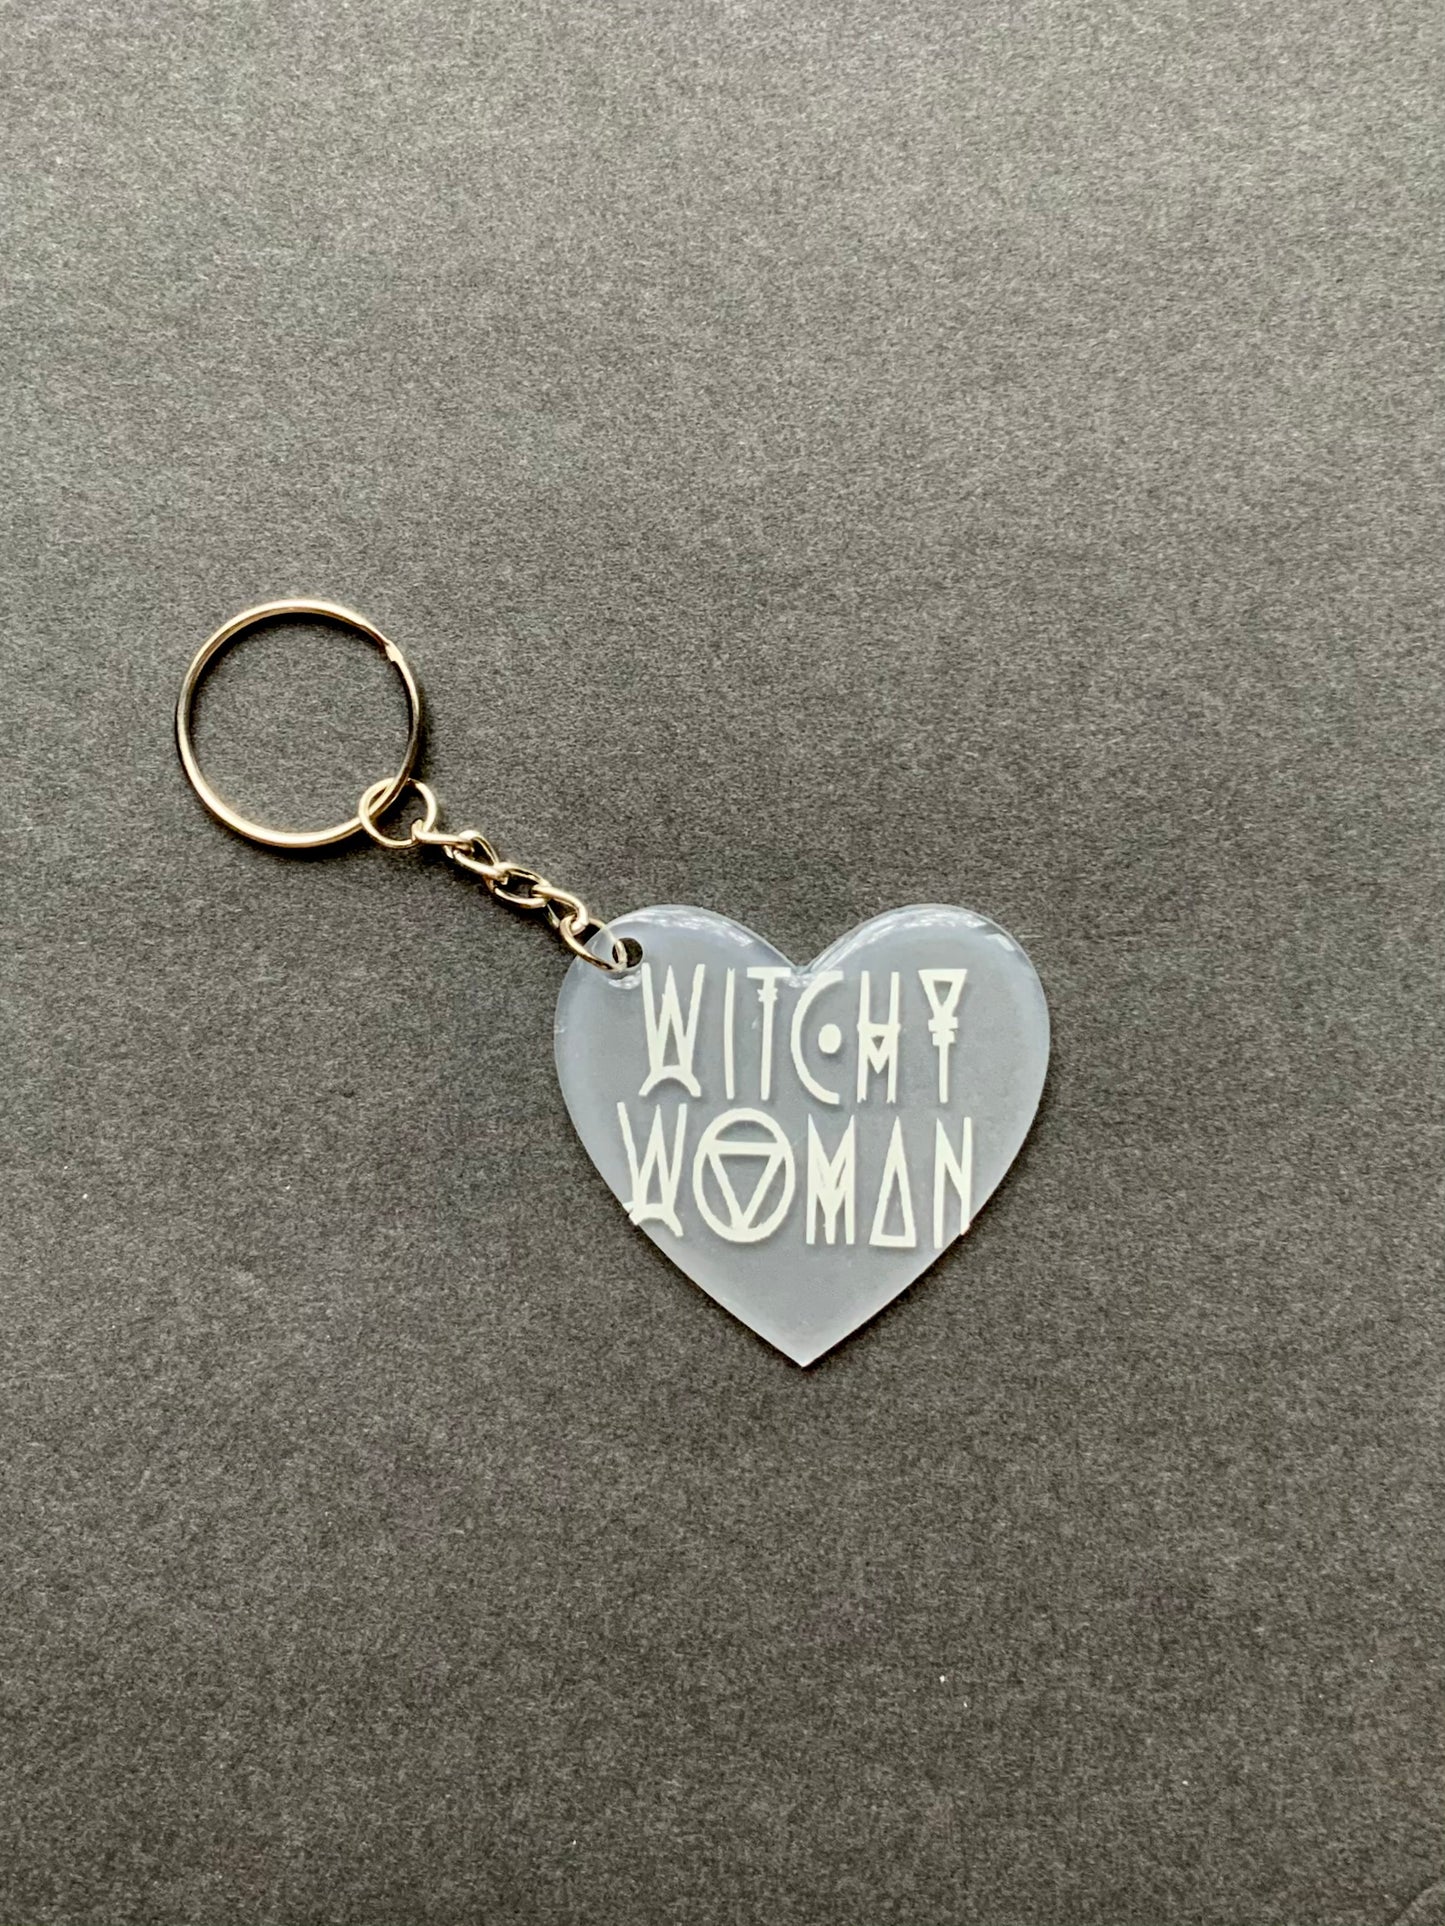 WItchy Woman Key Chain